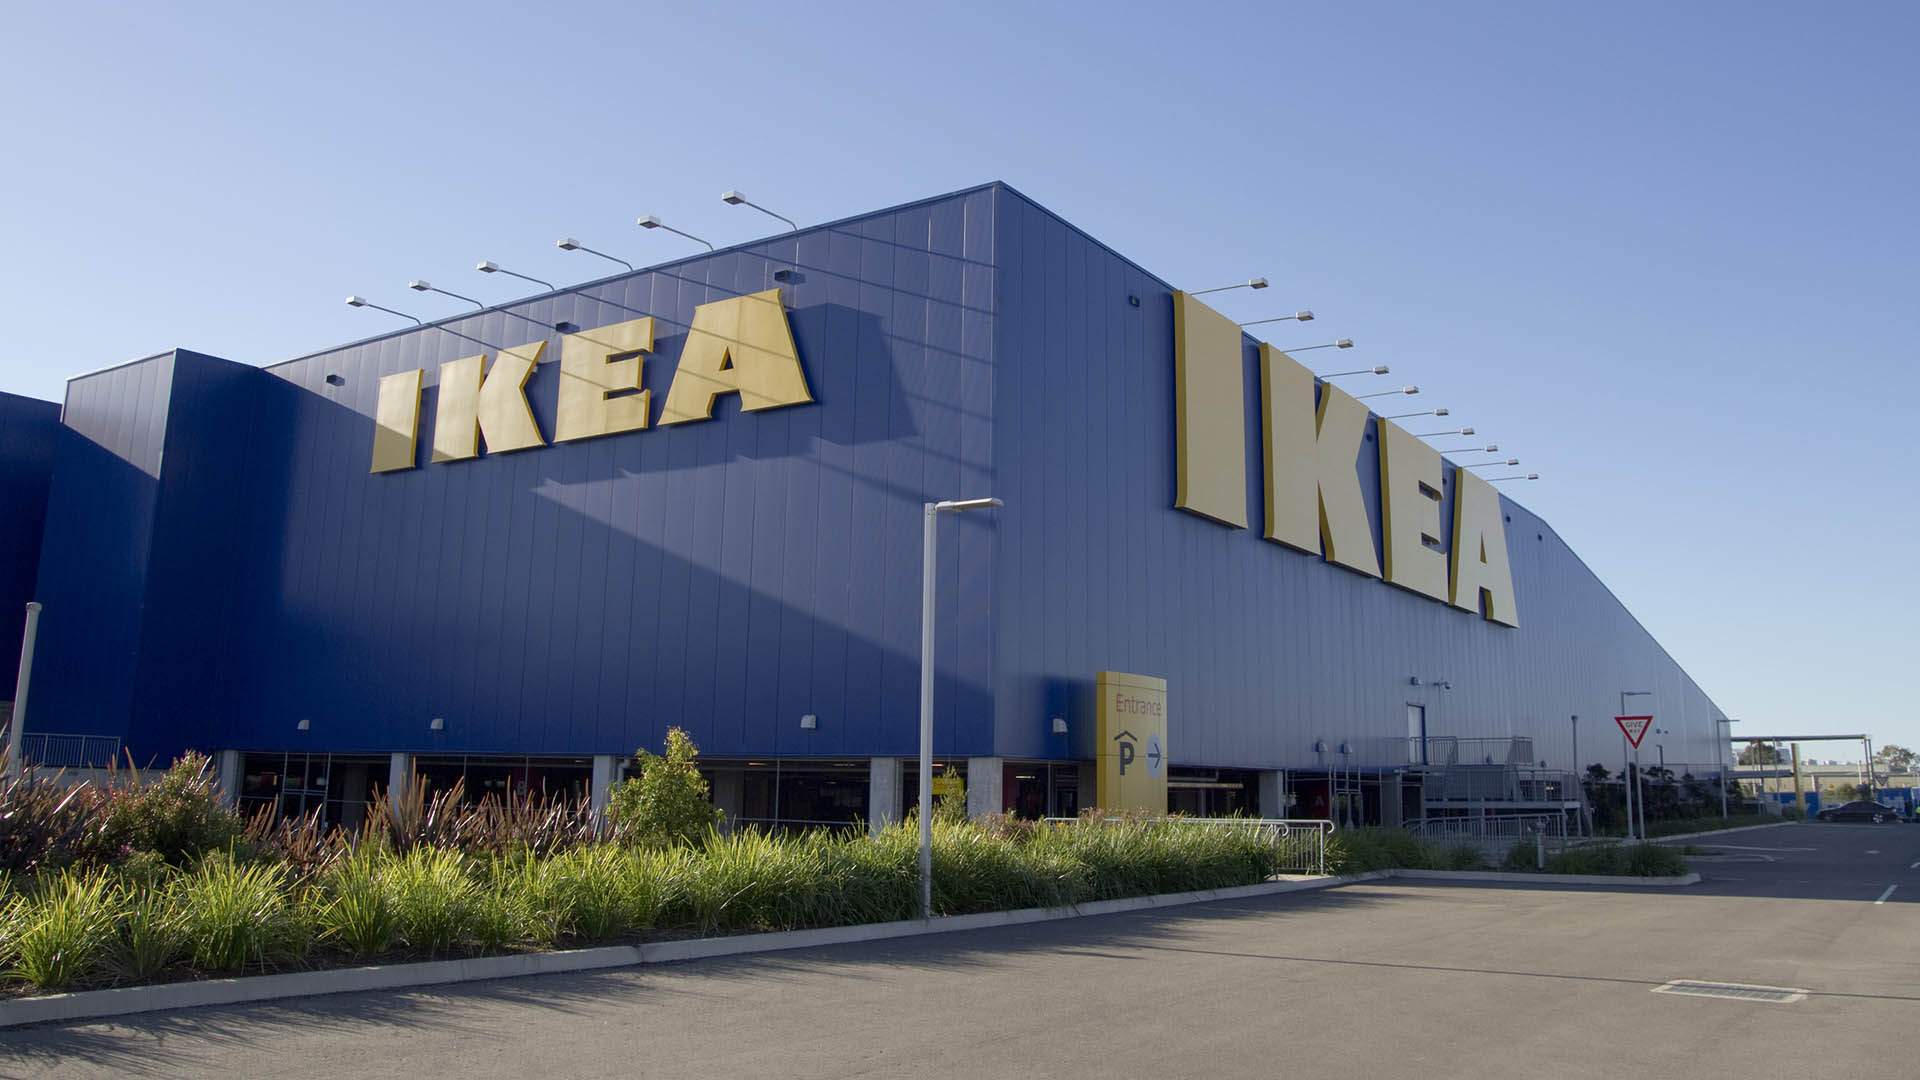 IKEA Is Increasing Refunds on Returned and Unwanted Office Furniture by 50 Percent This Week